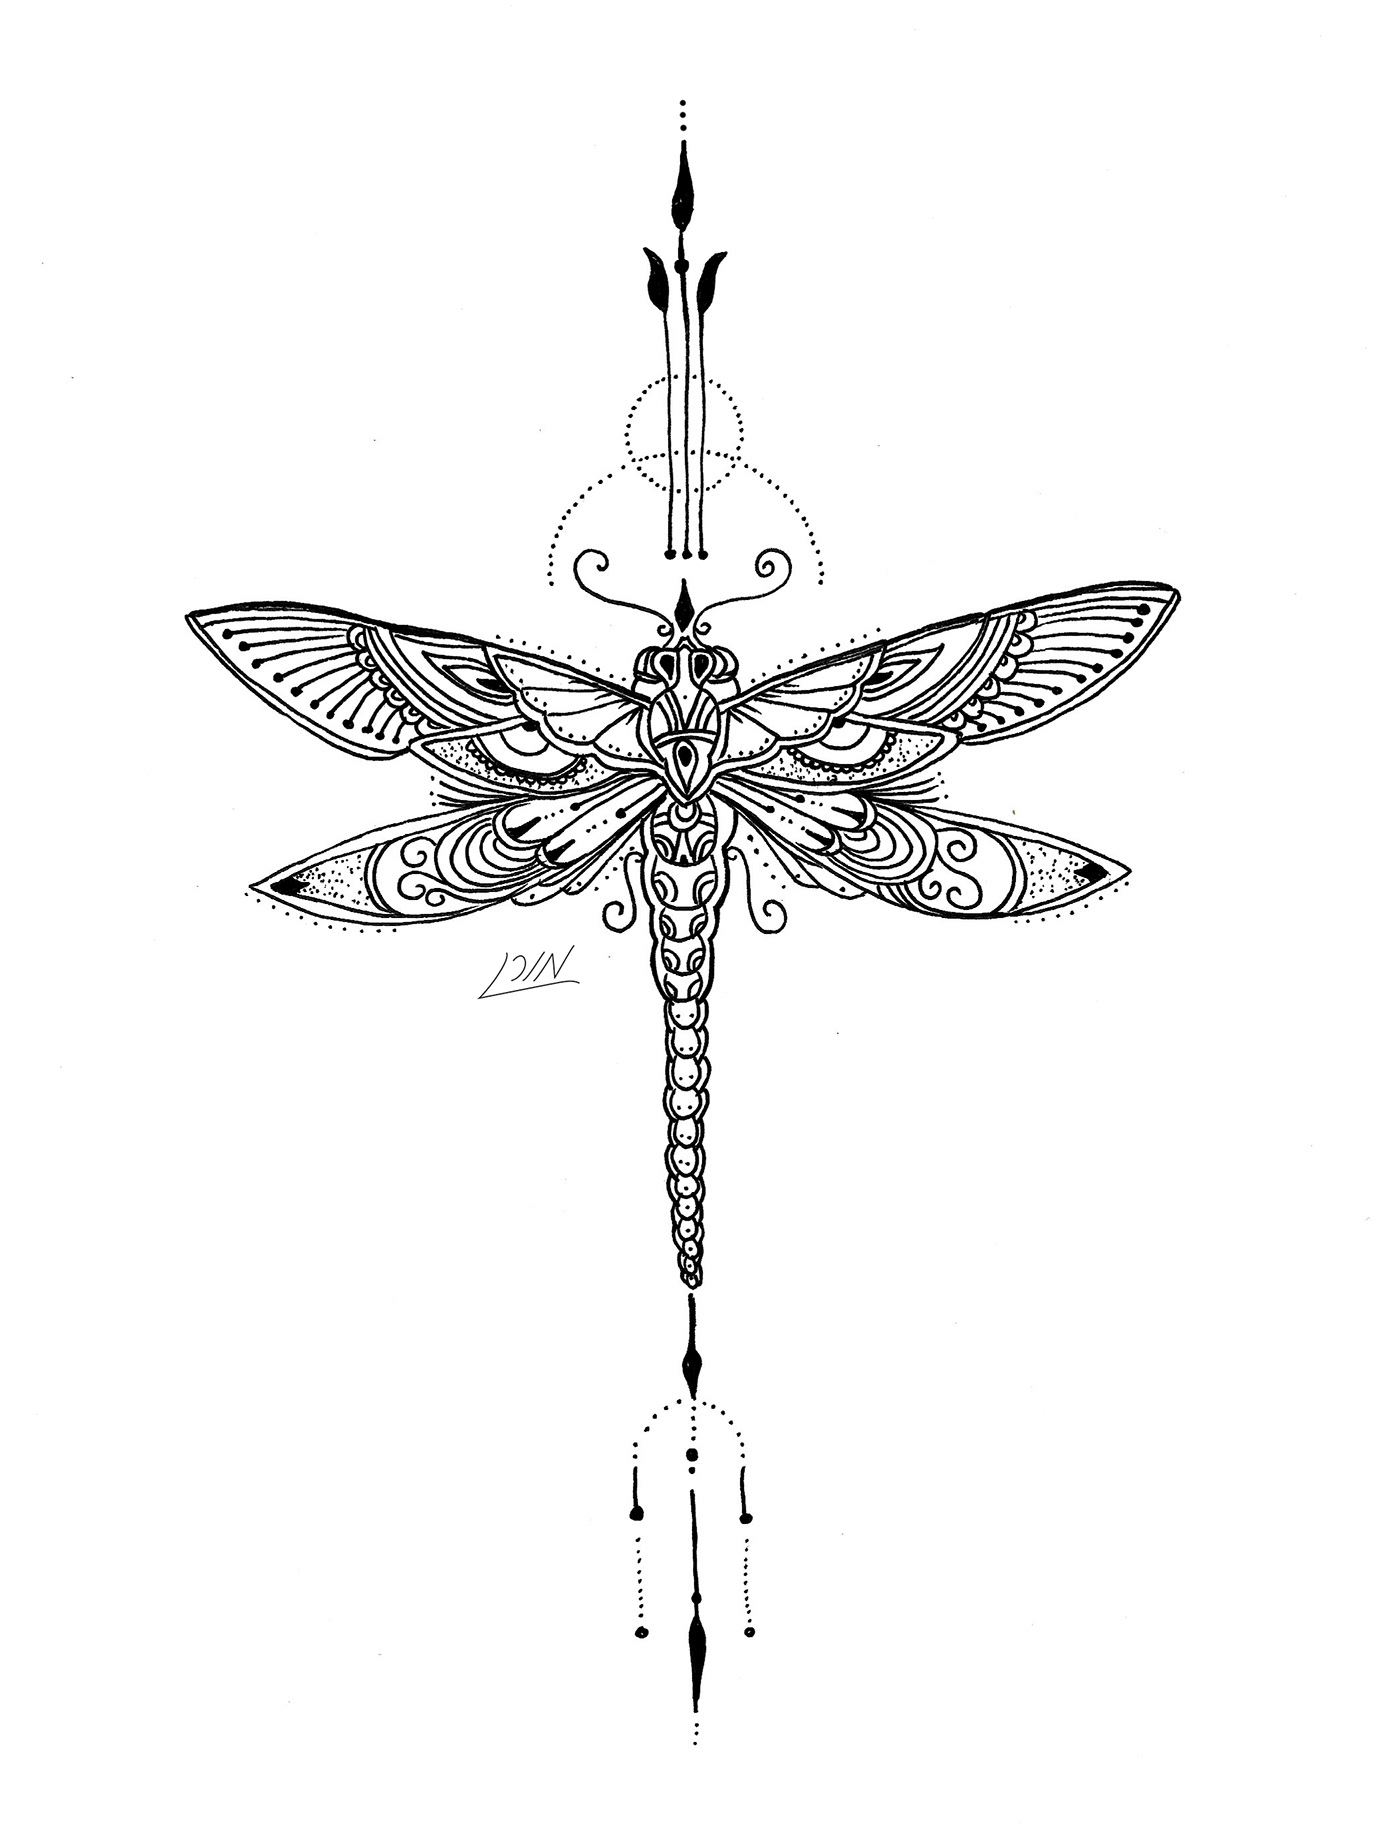 ♦ Dragonfly ♦ on Behance